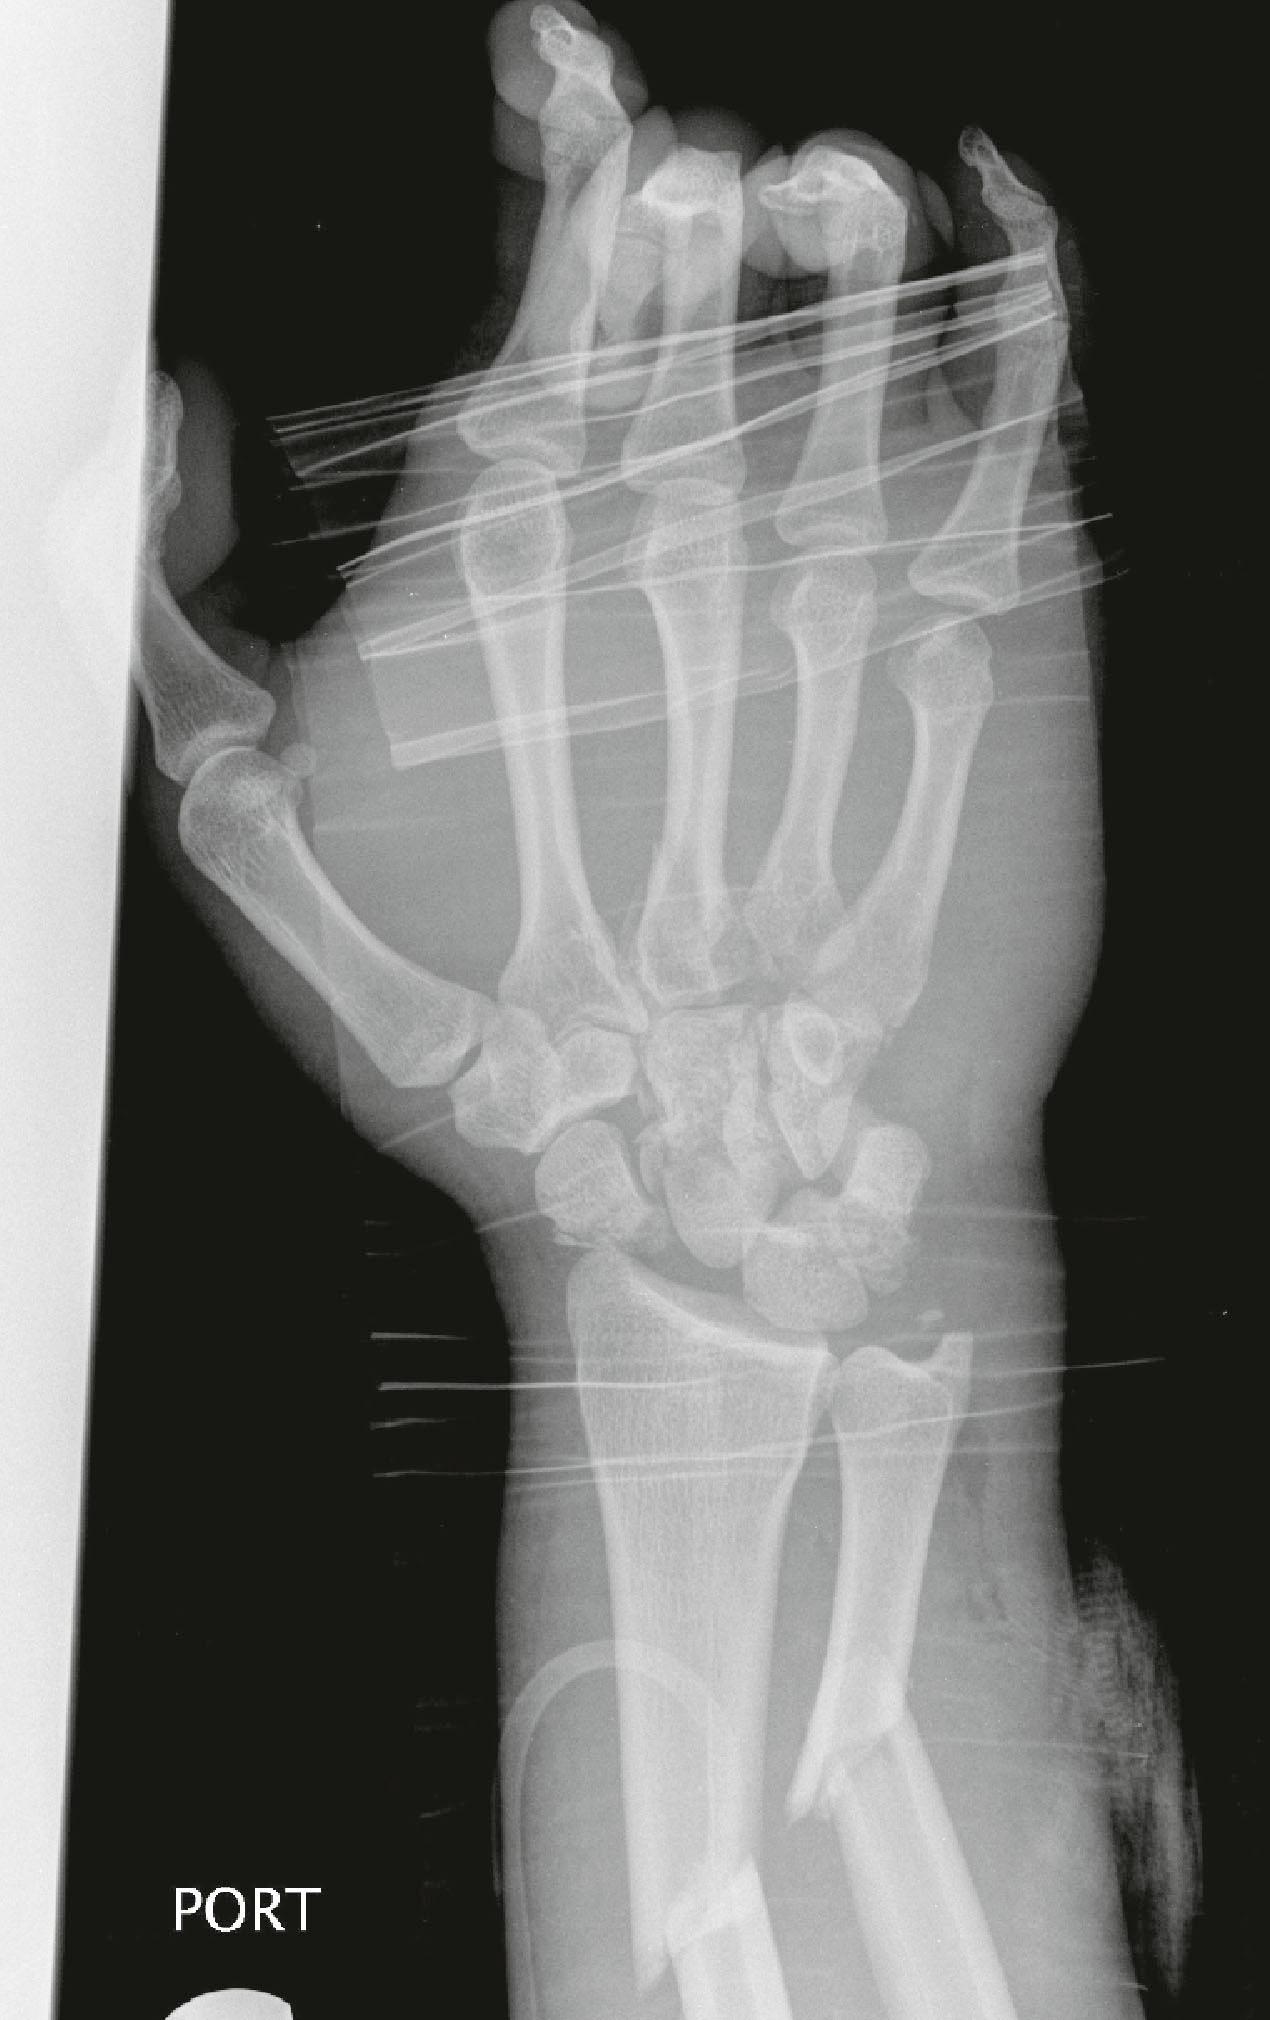 Figure 3.15, This radiograph shows a perilunate fracture dislocation with disruption of the normal smooth carpal arcs. There are associated radioulnar shaft fractures.